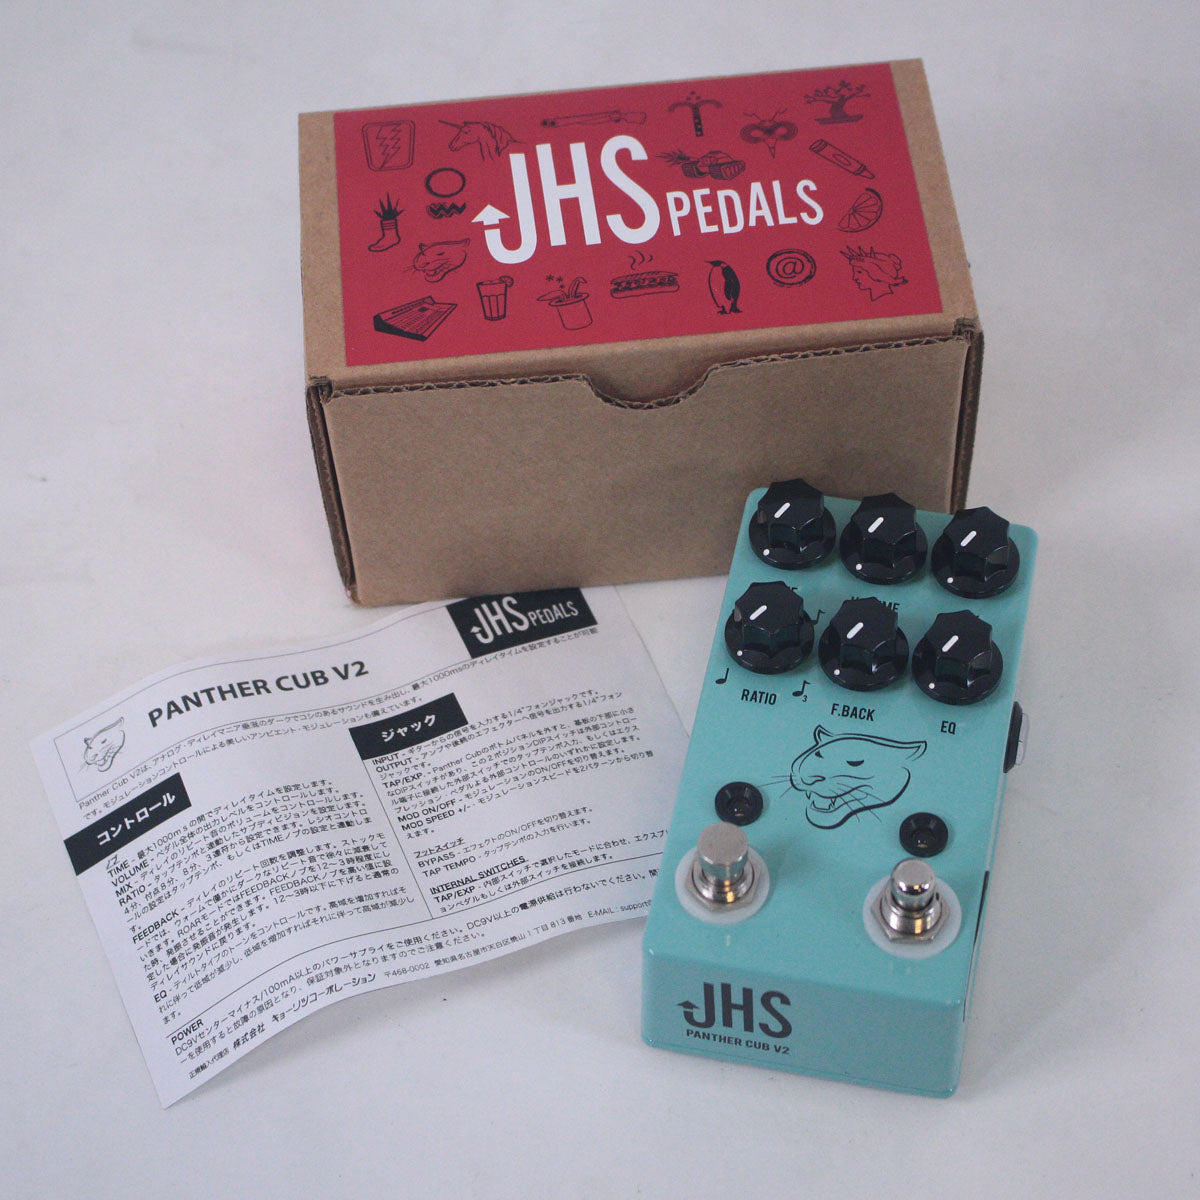 [SN 3447] USED JHS PEDALS / Panther Cub V2 [05]